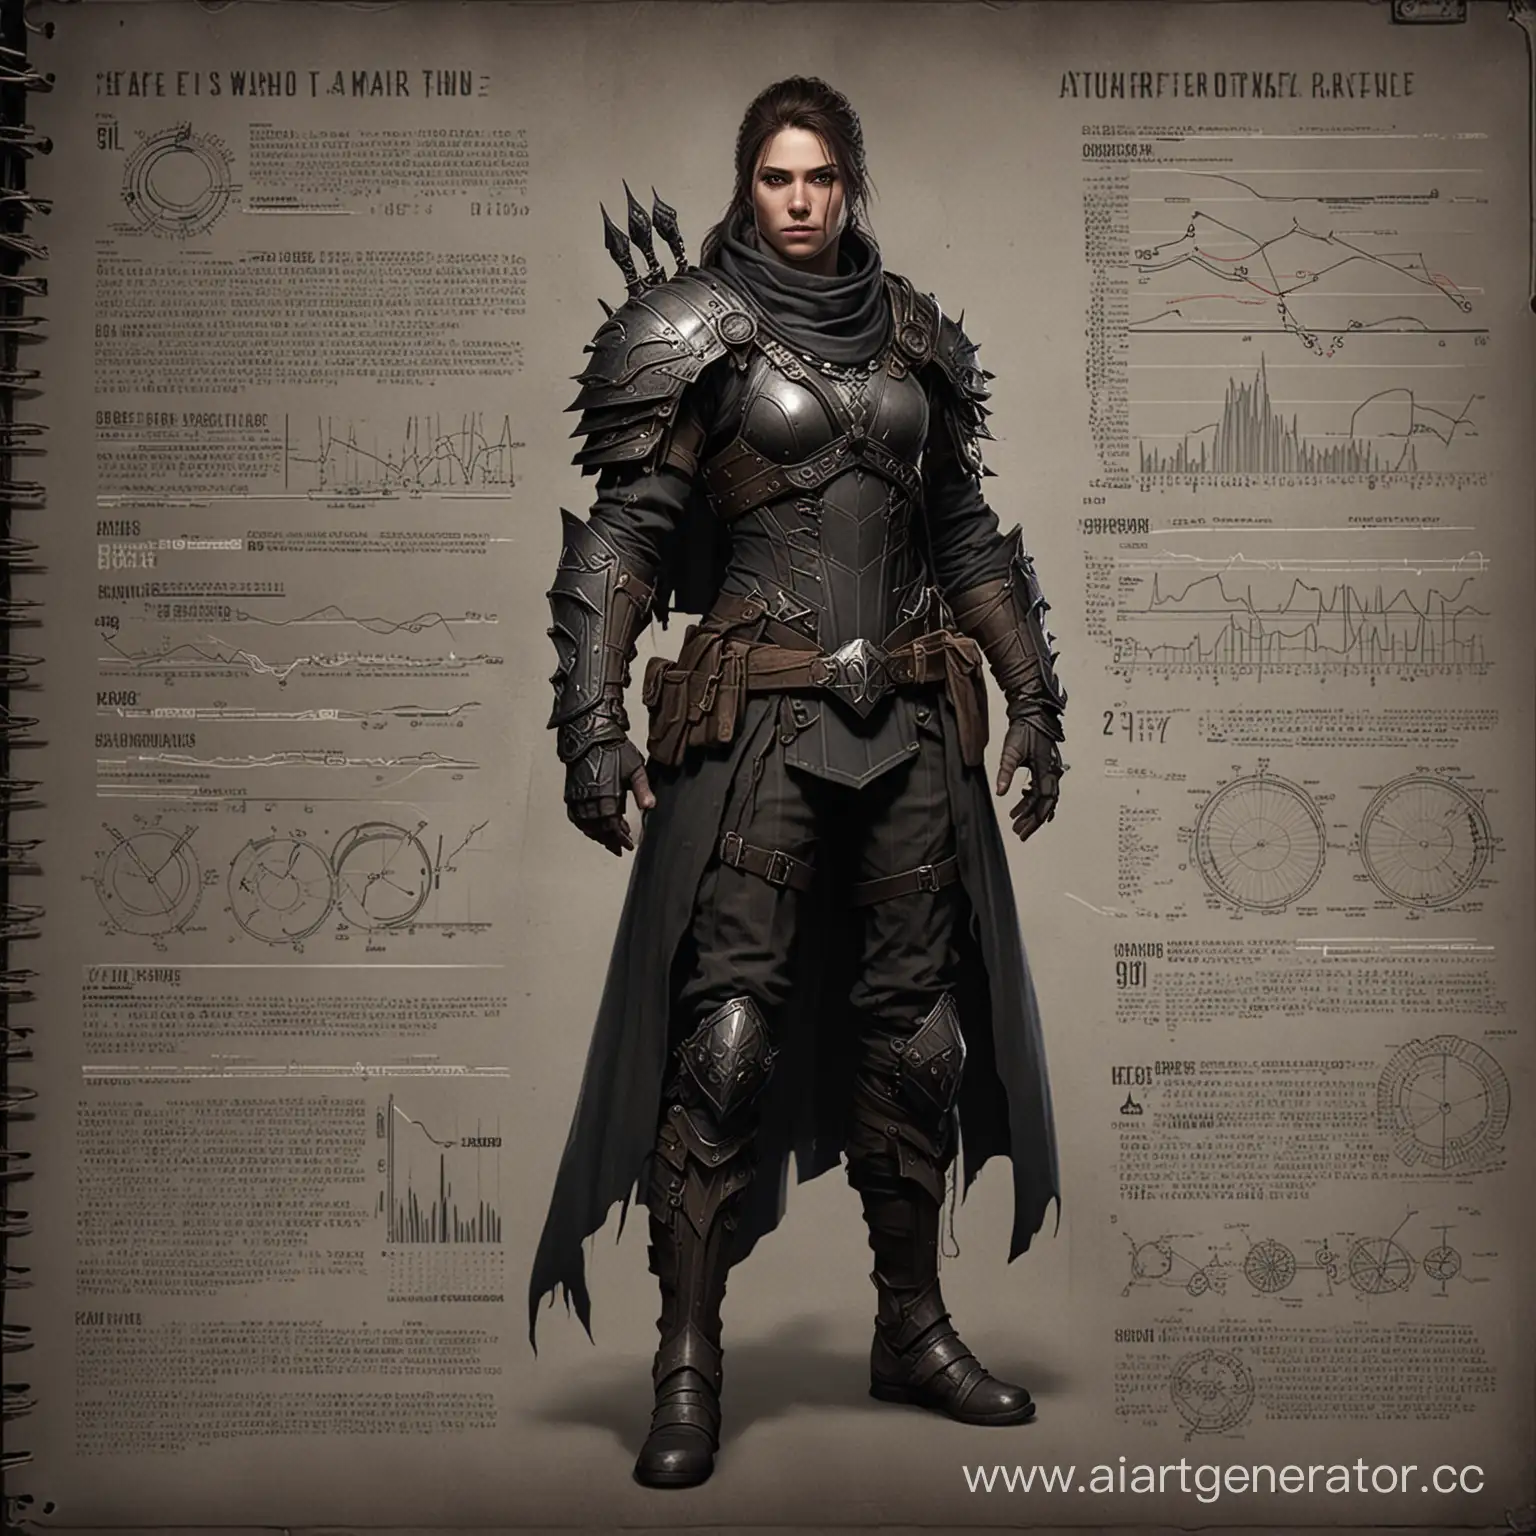 magazine, statistics, lines pointing to clothing and gear, detailed character from a dark, high epic fantasy, lots of details, graphs --ar 9:16